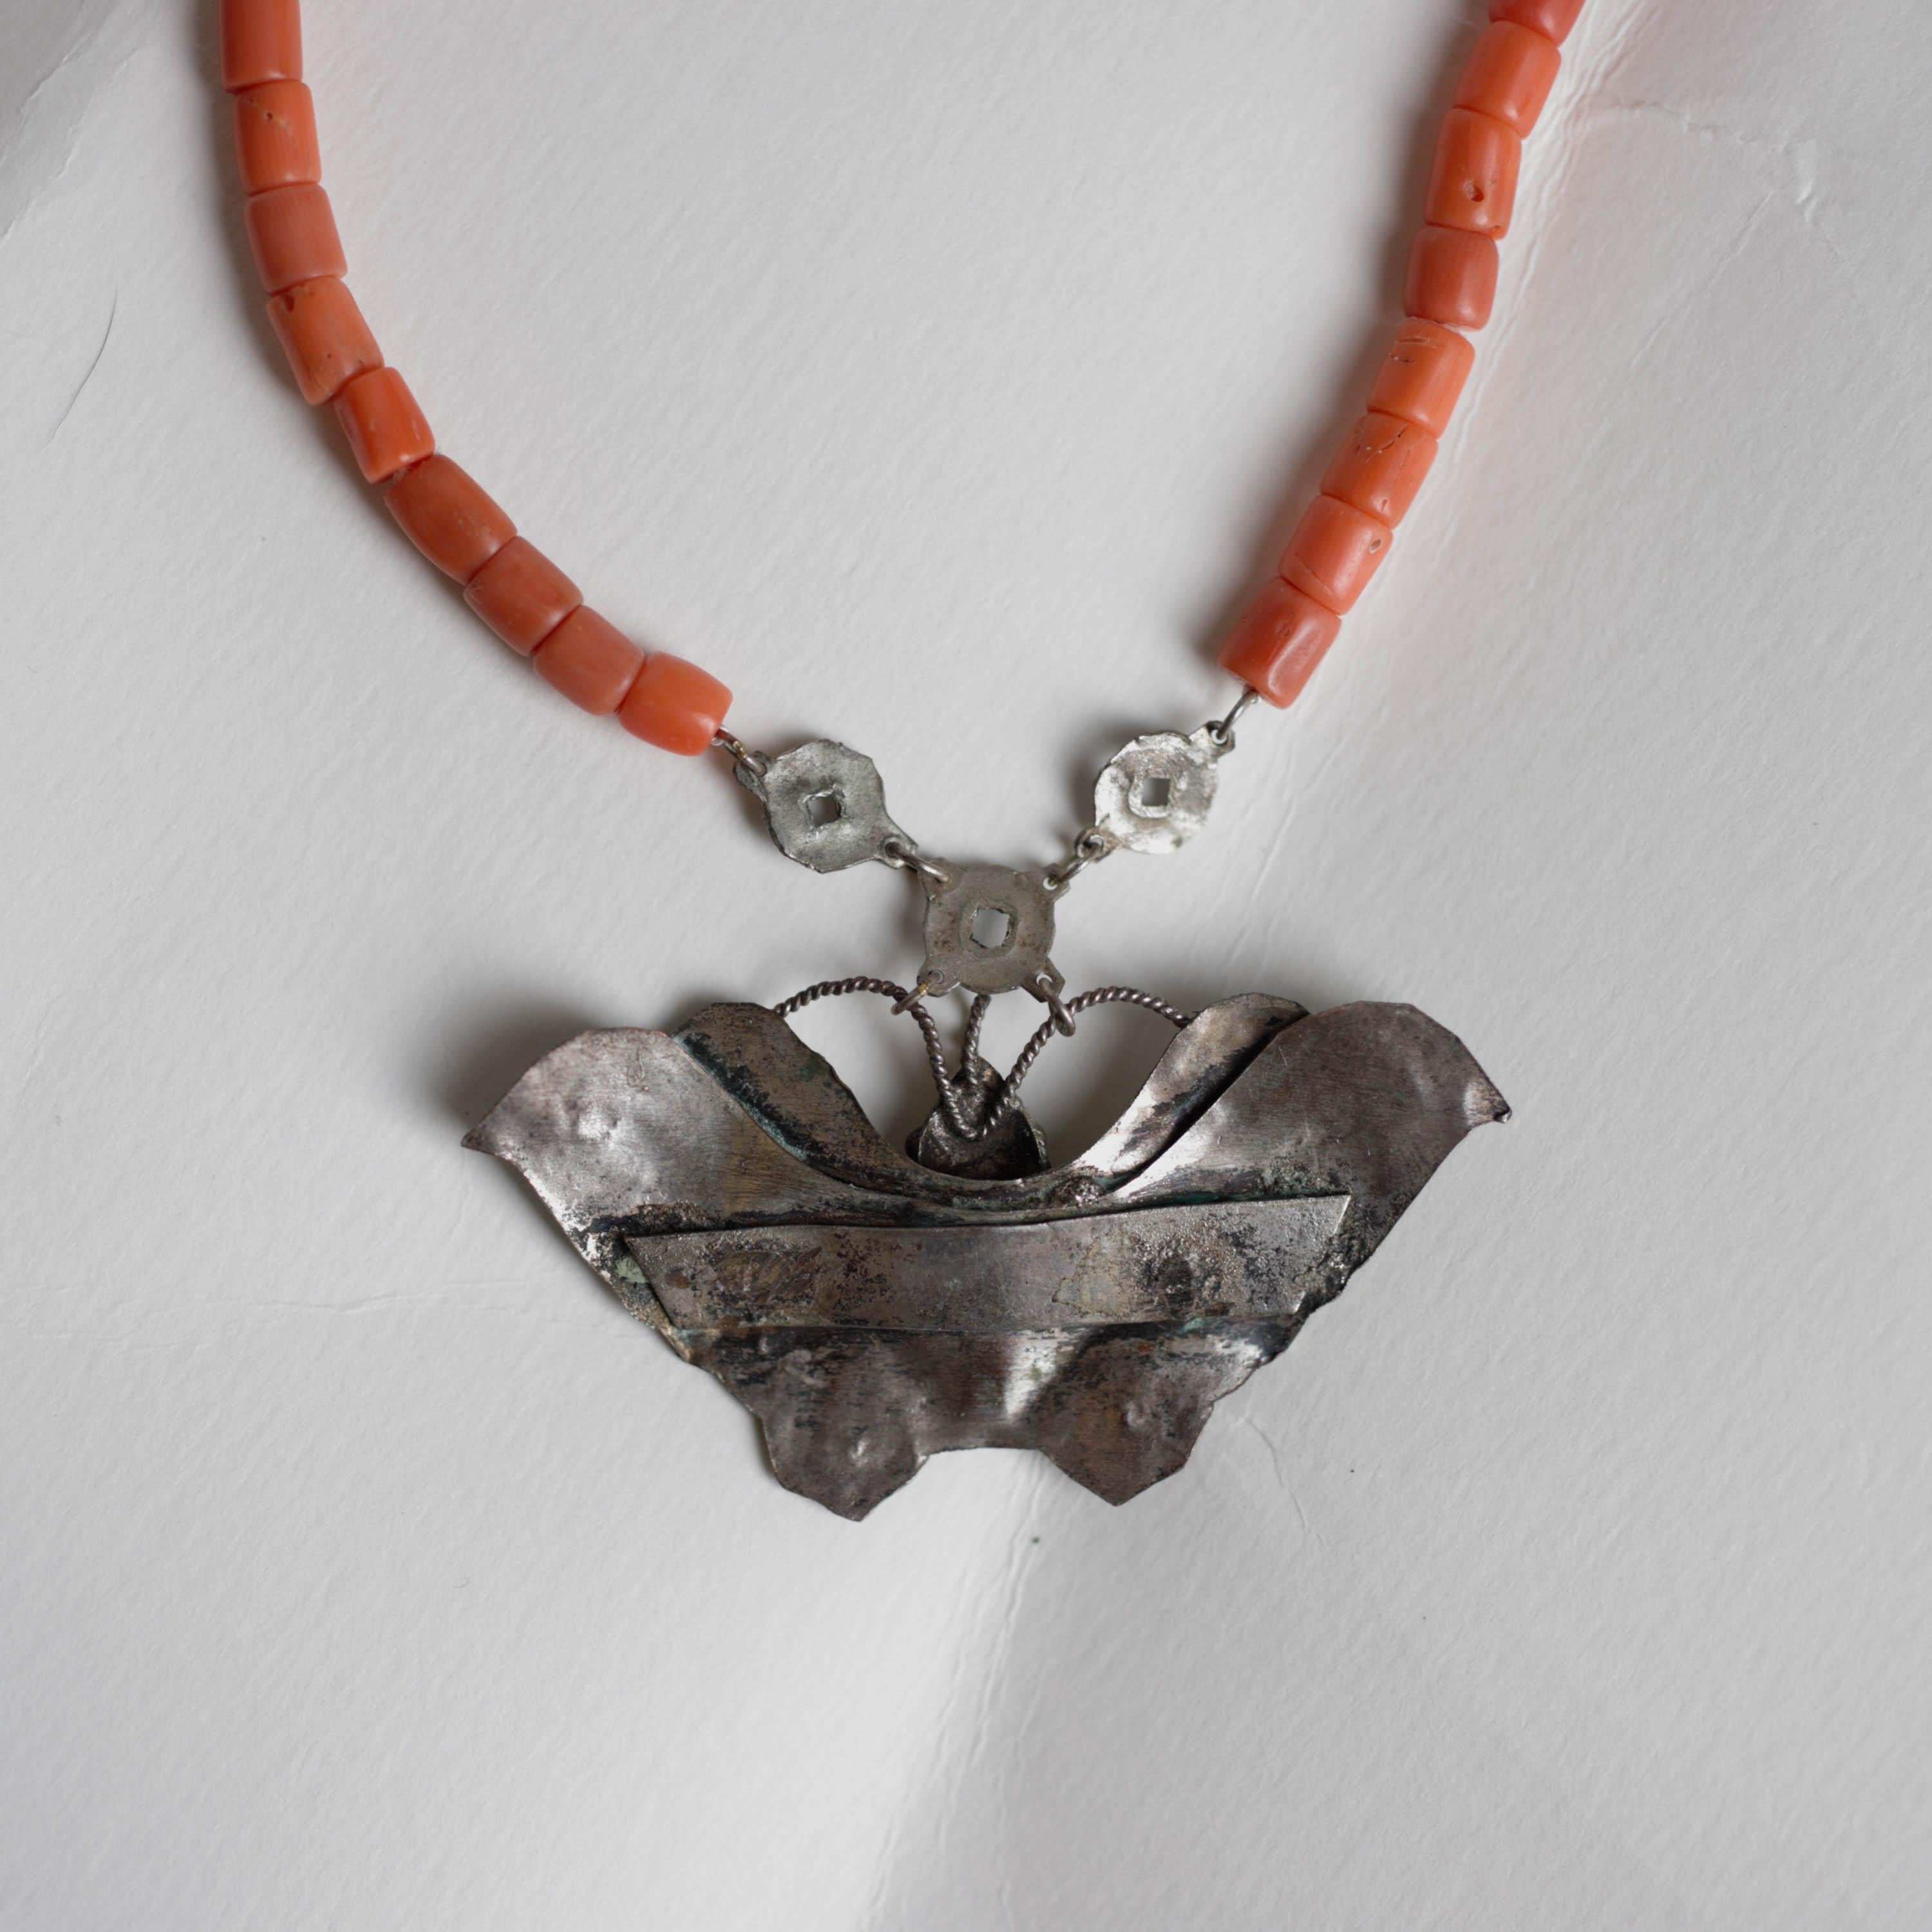 Chinese Antique Art Nouveau Coral and Kingfisher Tian-Tsui Necklace For Sale 3